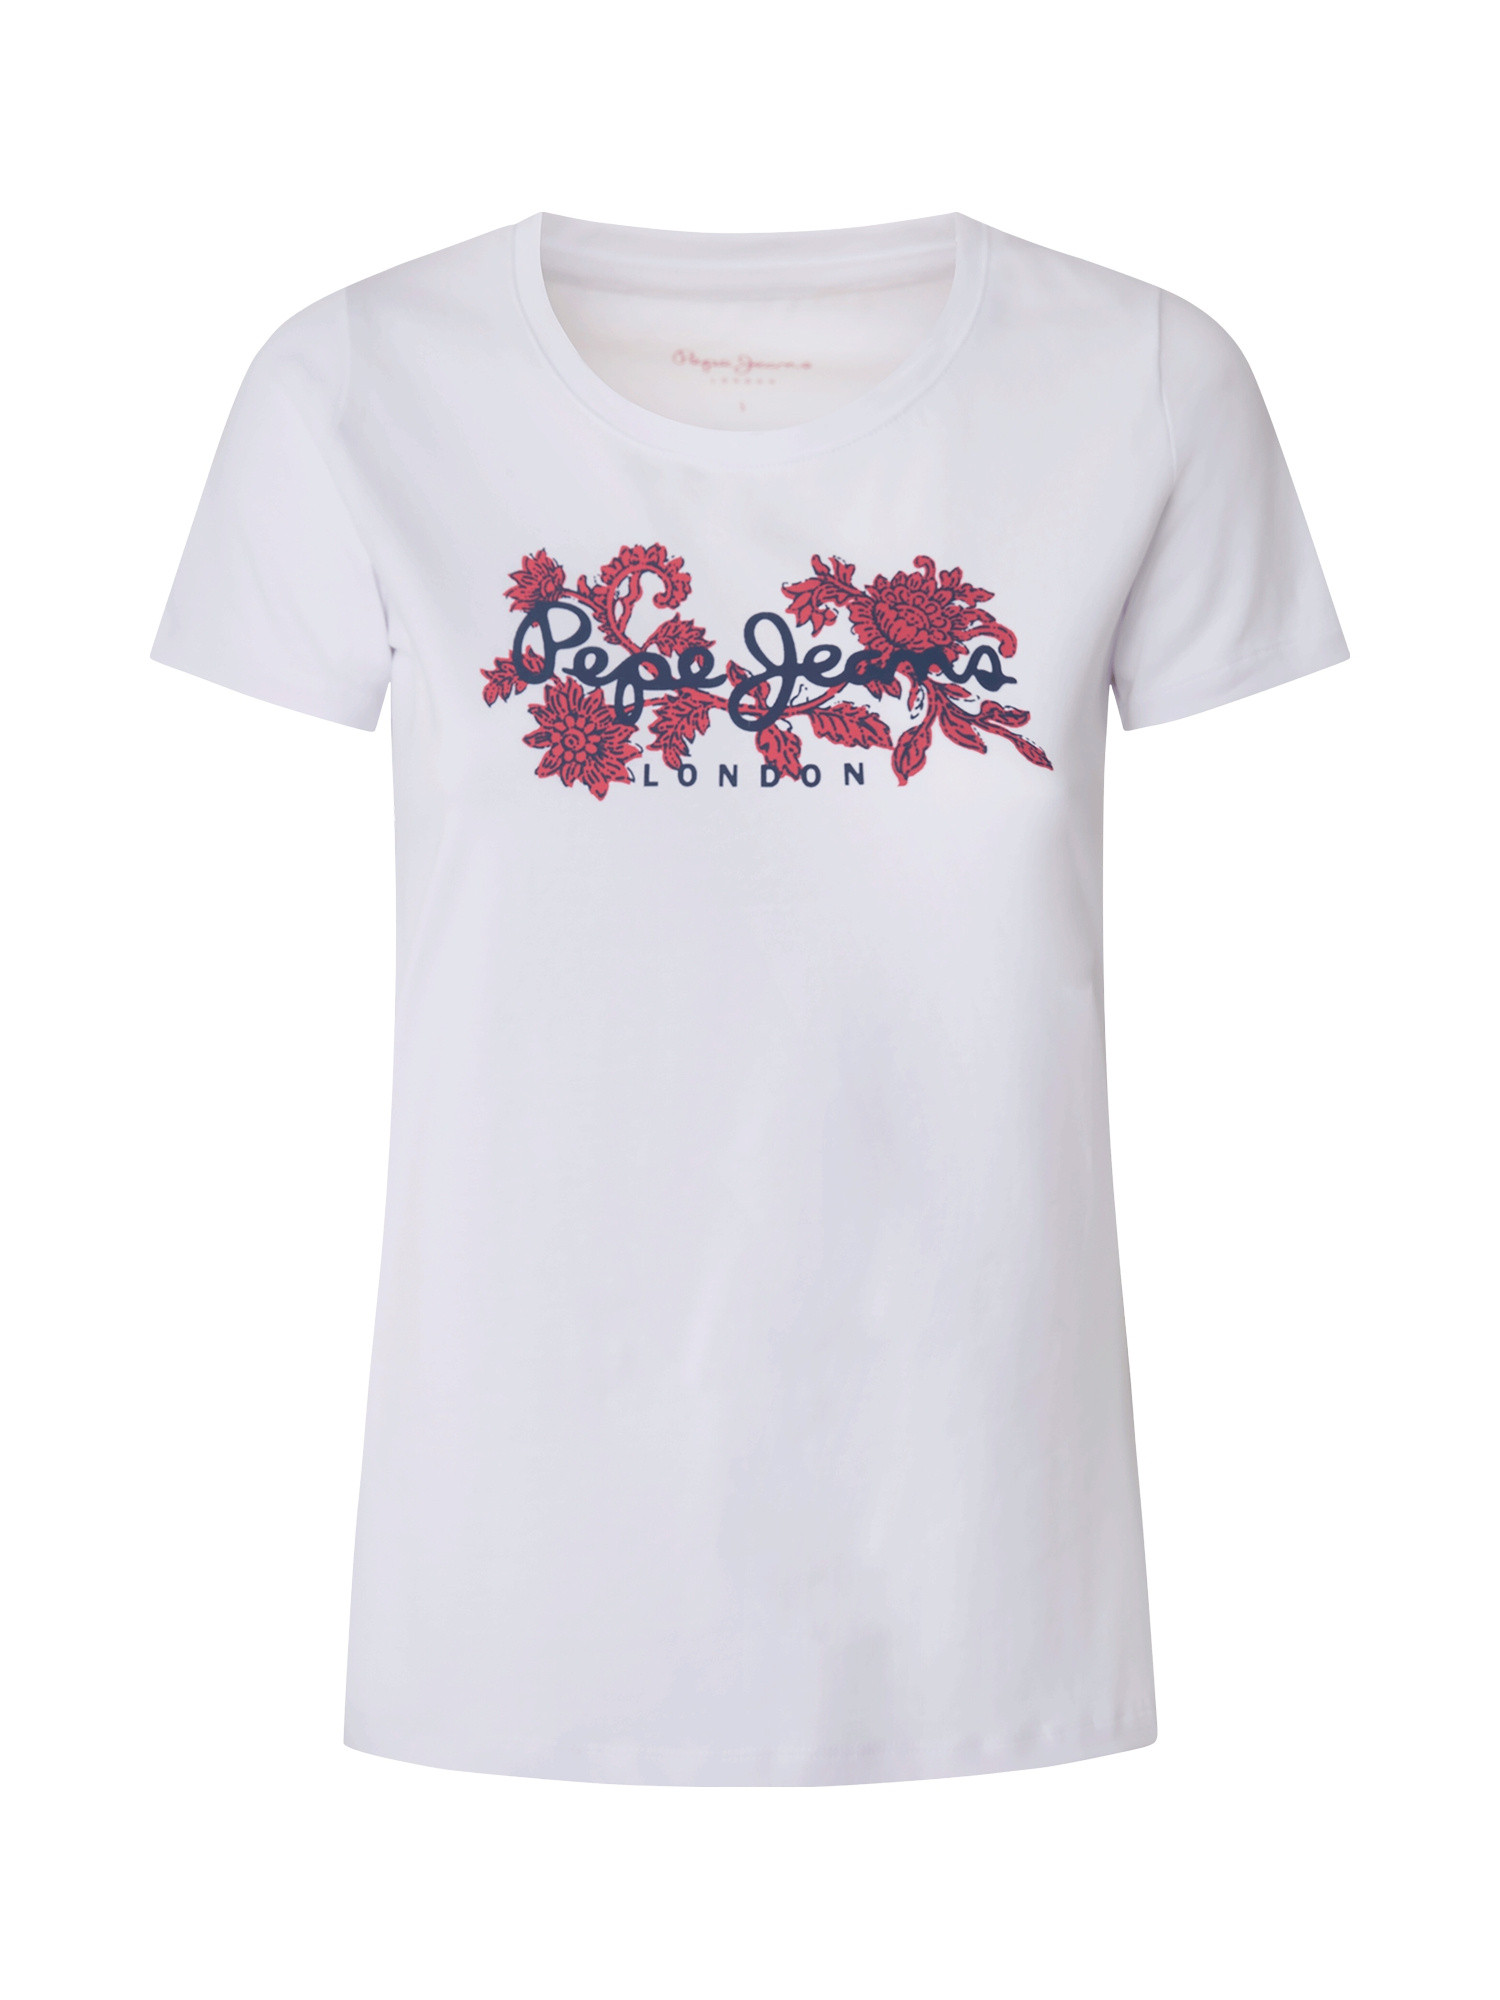 Pepe Jeans - T-shirt con stampa, Bianco, large image number 0